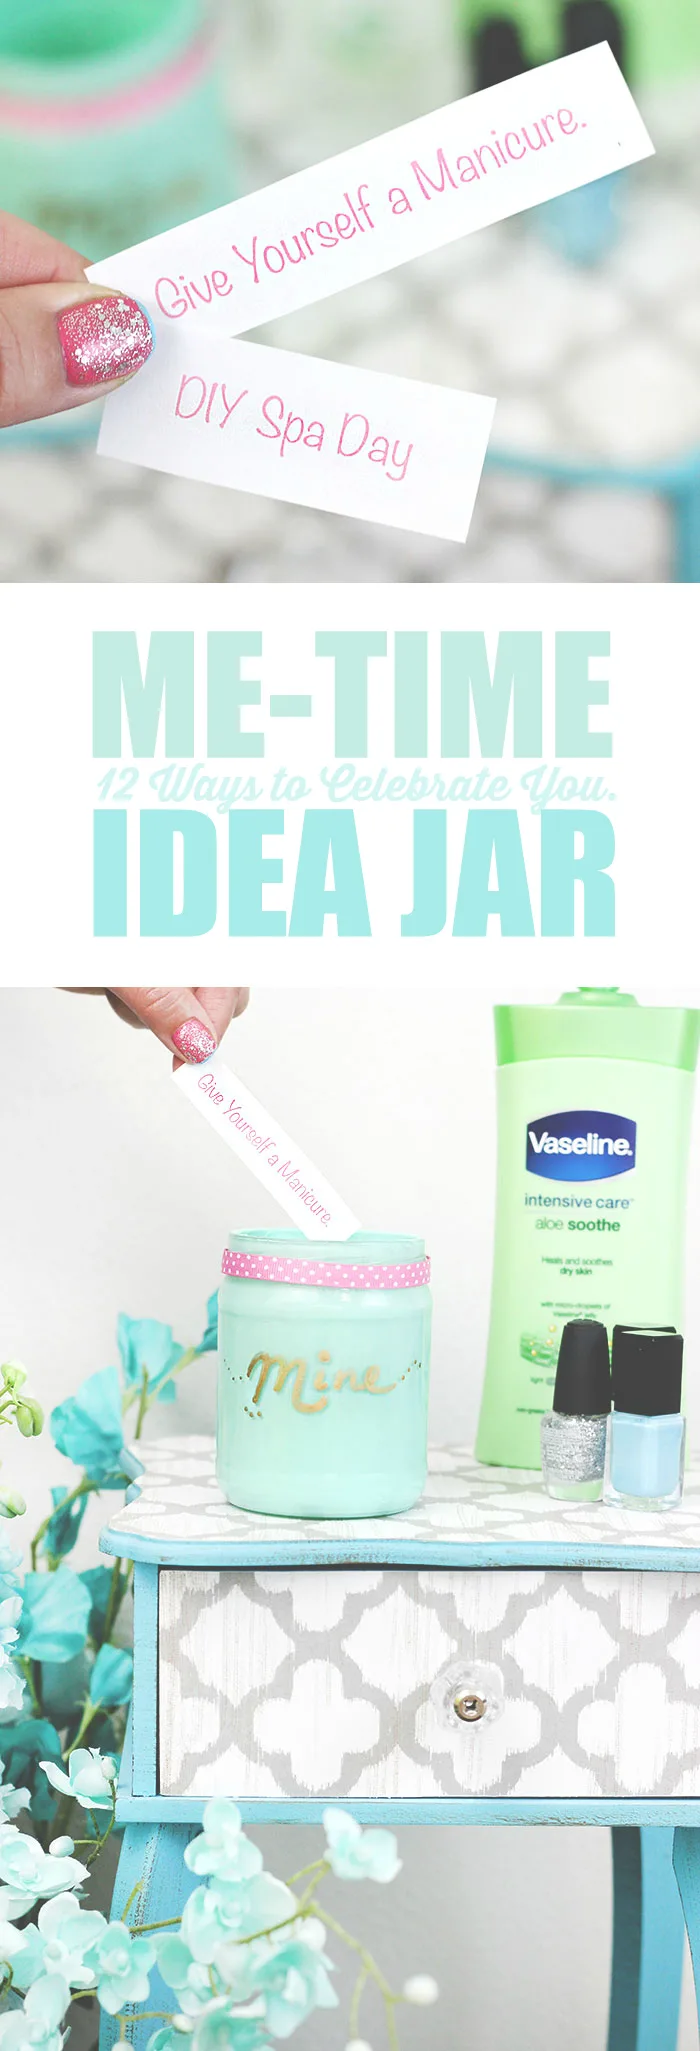 Feeling spent? Remind yourself to enjoy a break with a Me-Time Idea Jar + 12 ideas.